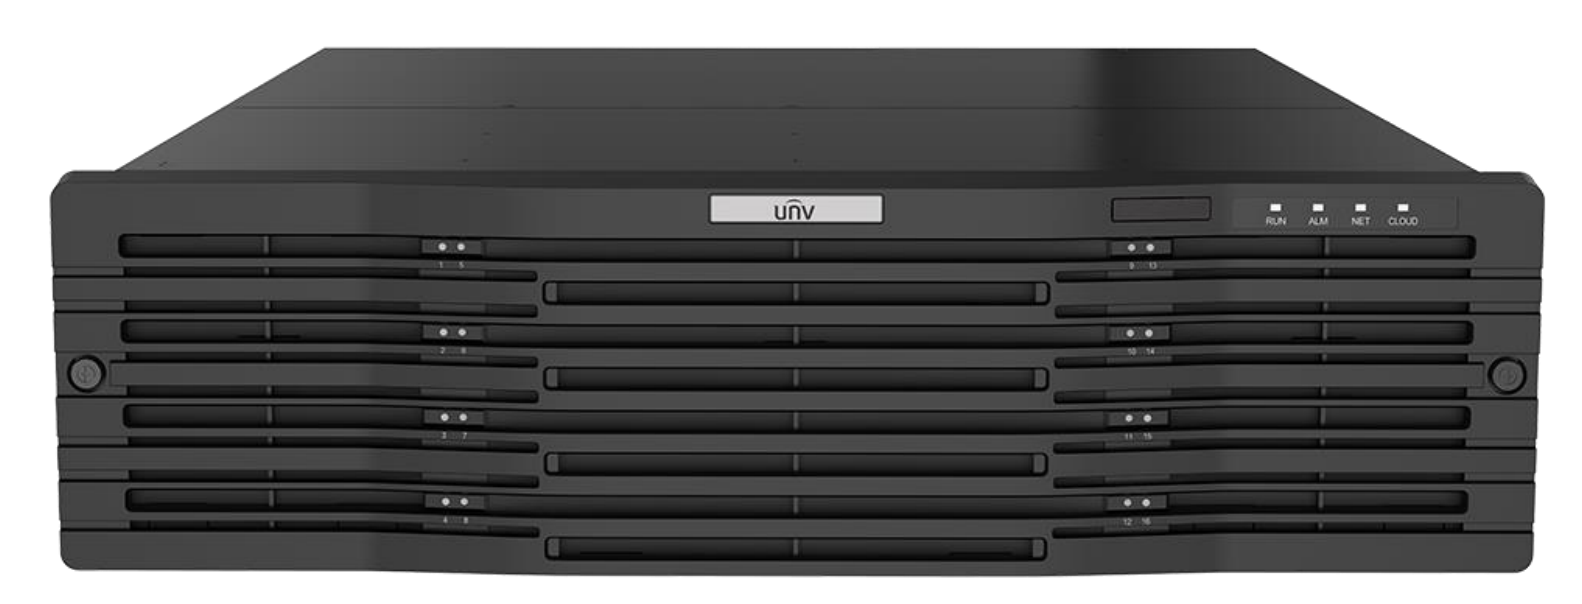 UNIVIEW PRO SERIES 128CH NVR UPTO 16MP 640Mbps INPUT 16x SATA HDD PORT UP TO 16TB EACH 240VAC